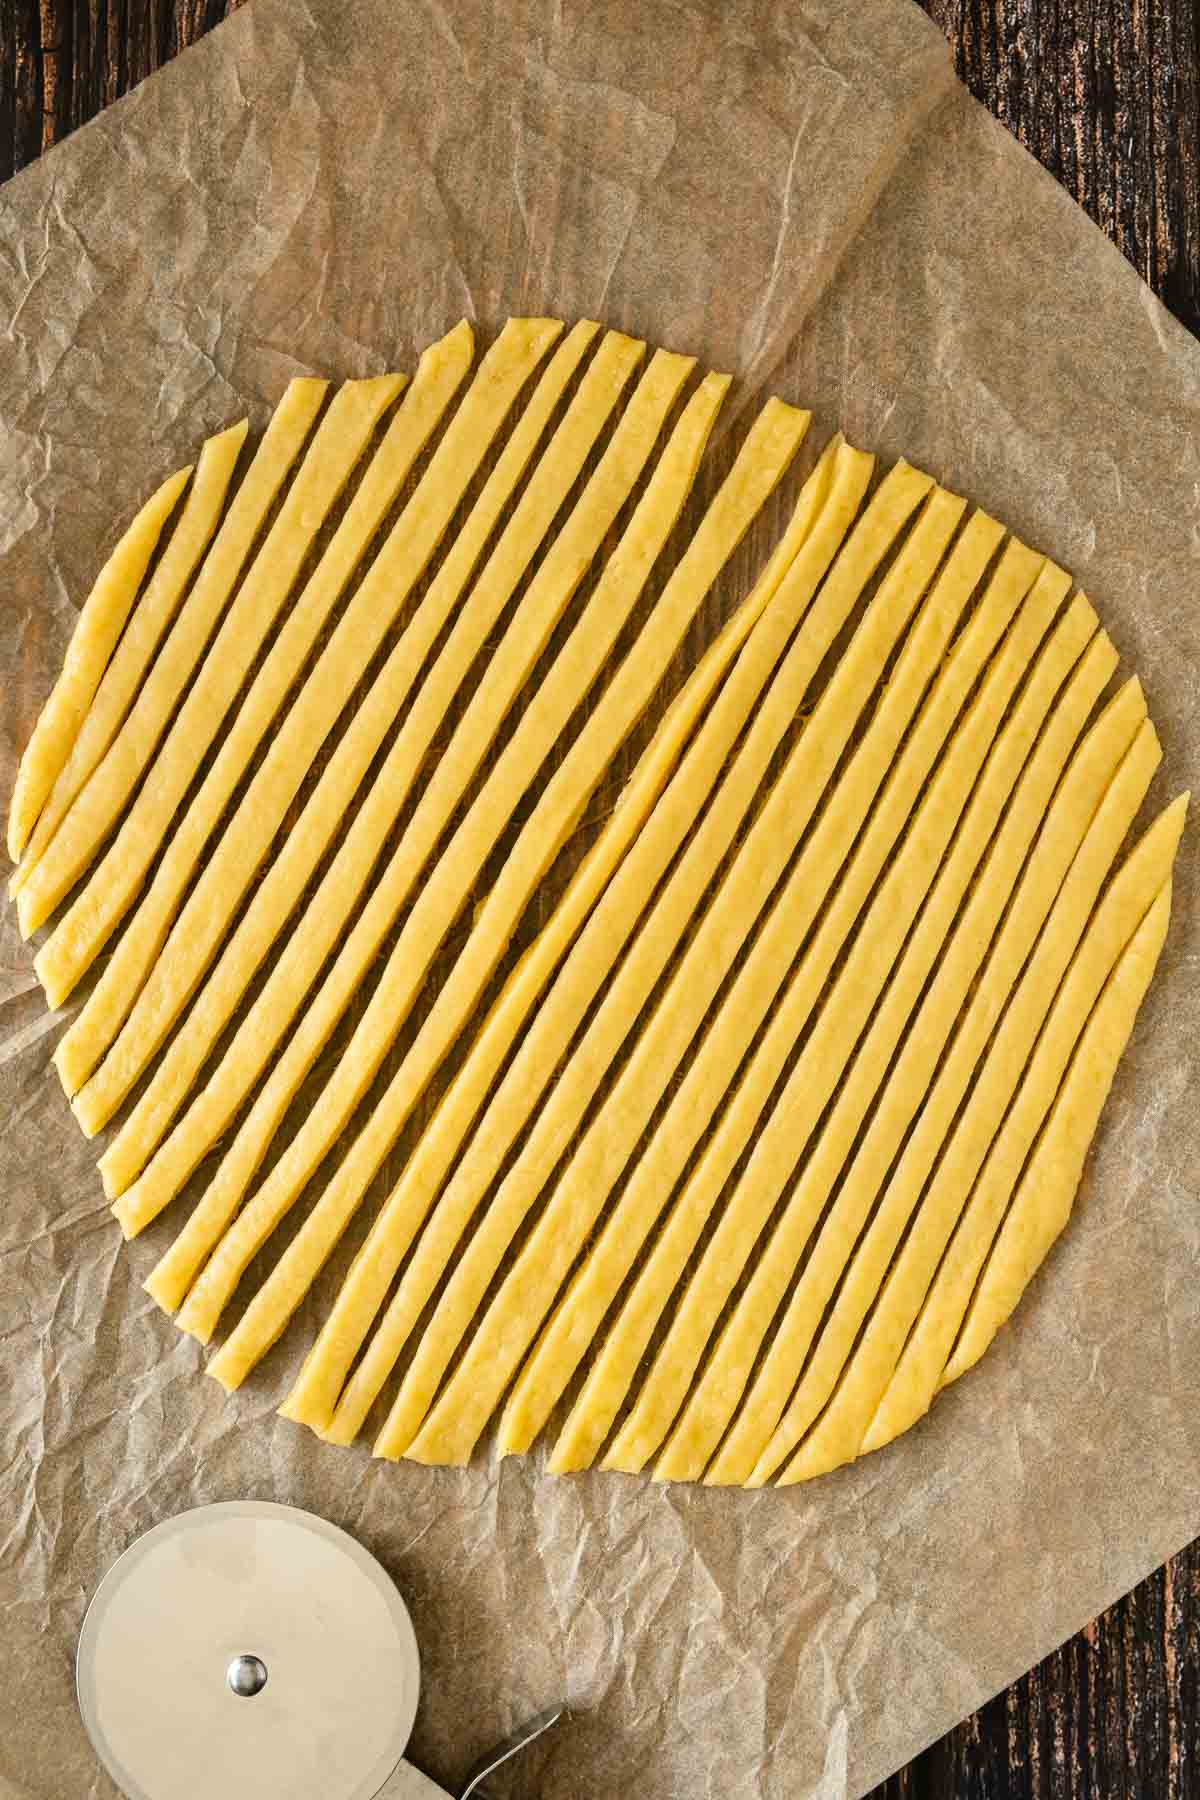 A large flat circle of dough rolled out to make noodles. It has been cut into strips of noodles for the soup.